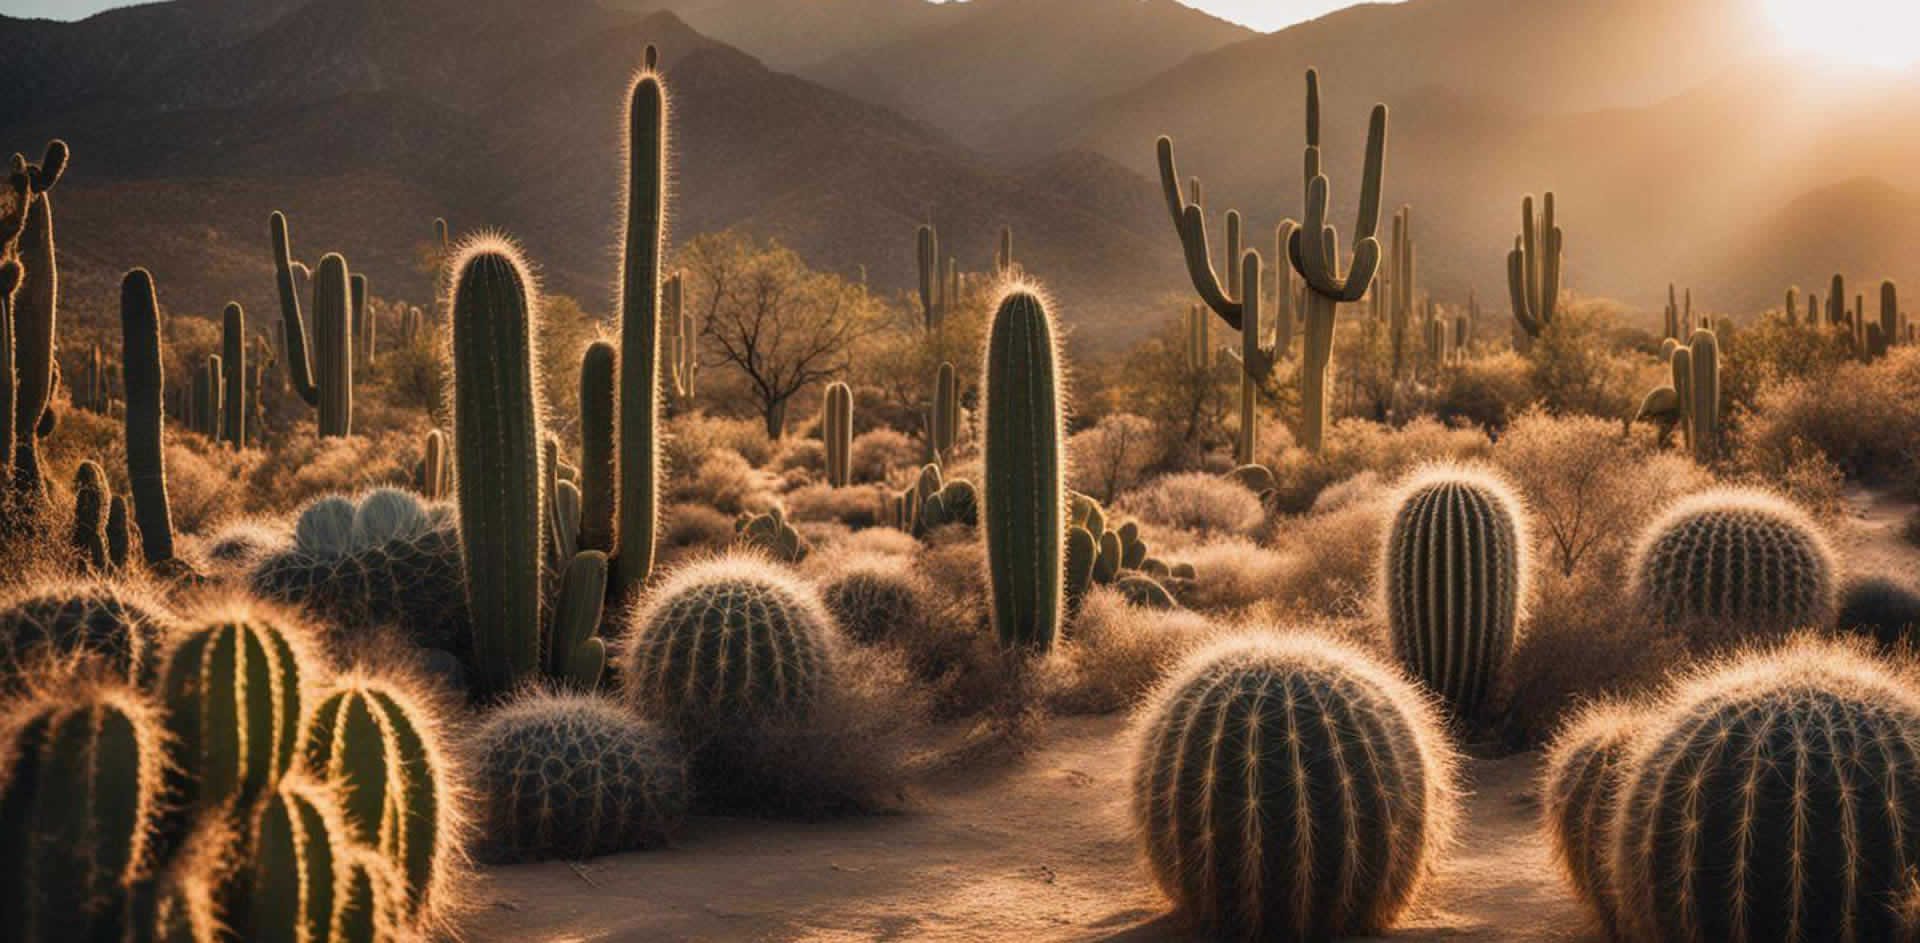 A group of cacti in a desert